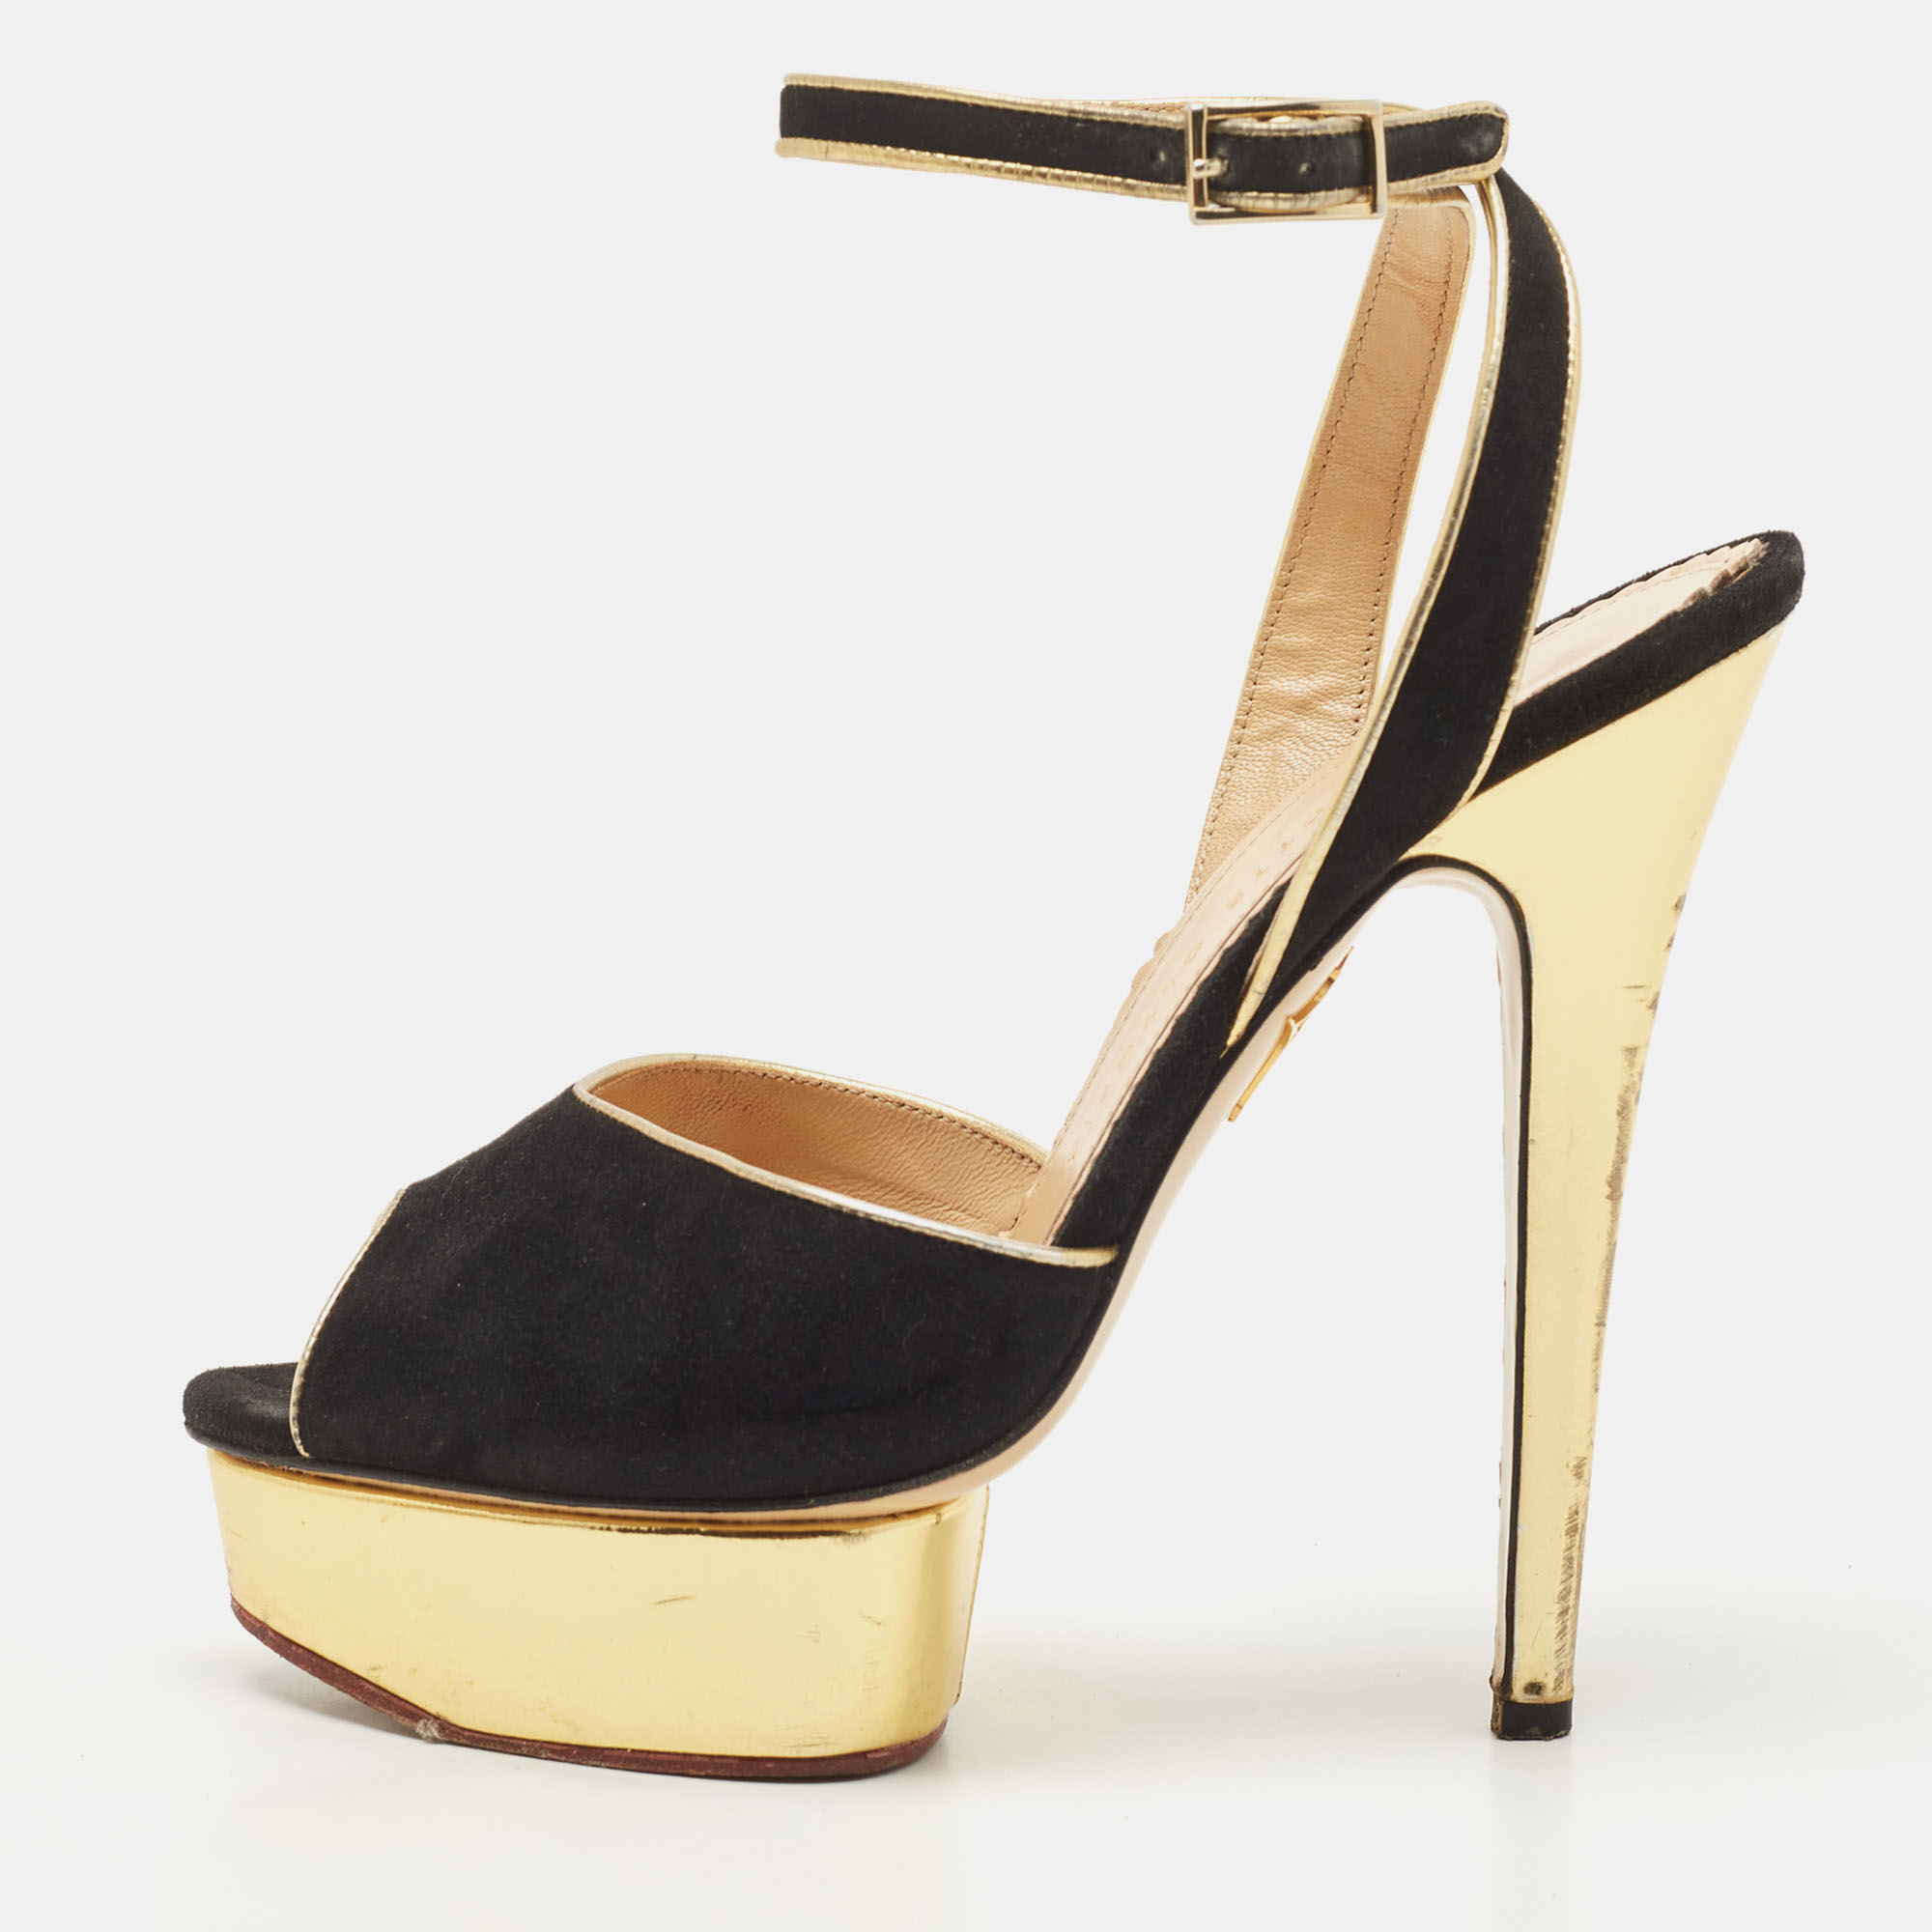 Pre-owned Charlotte Olympia Black Suede And Leather Peep Toe Platform Sandals Size 38.5